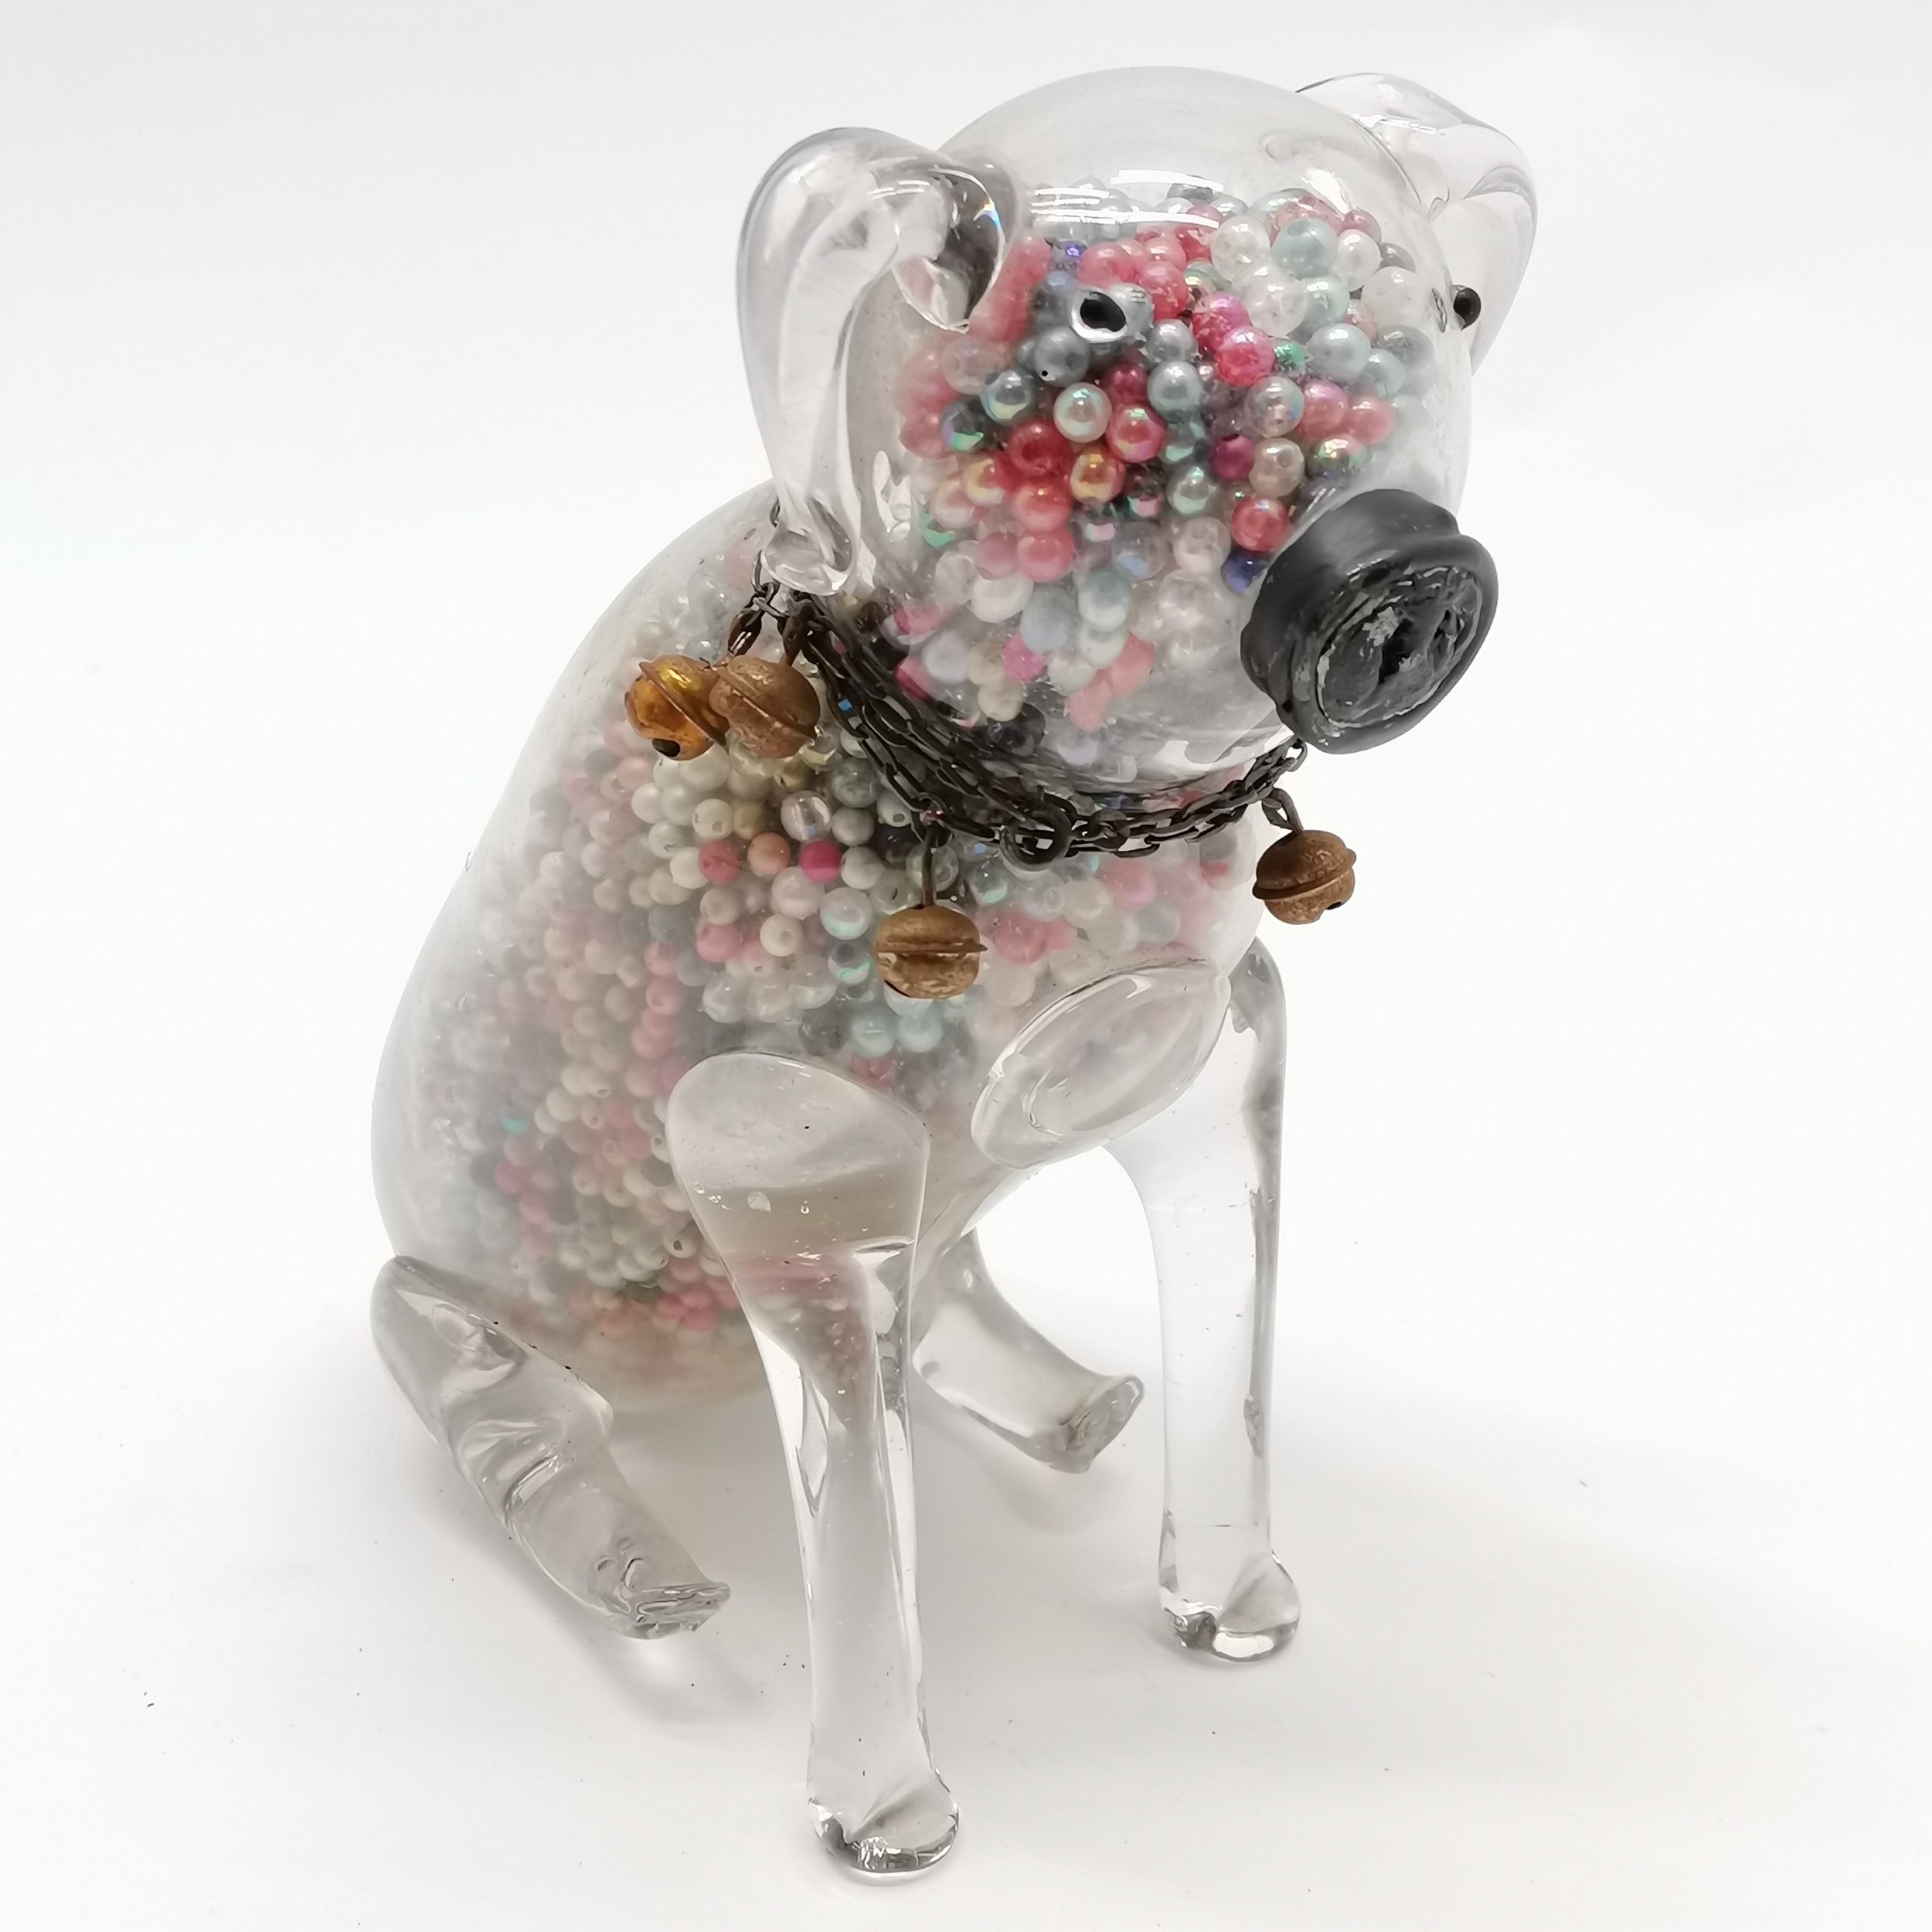 Unusual novelty glass dog figure filled with beads & has a metal chain collar with bells - 18.5cm - Bild 2 aus 4